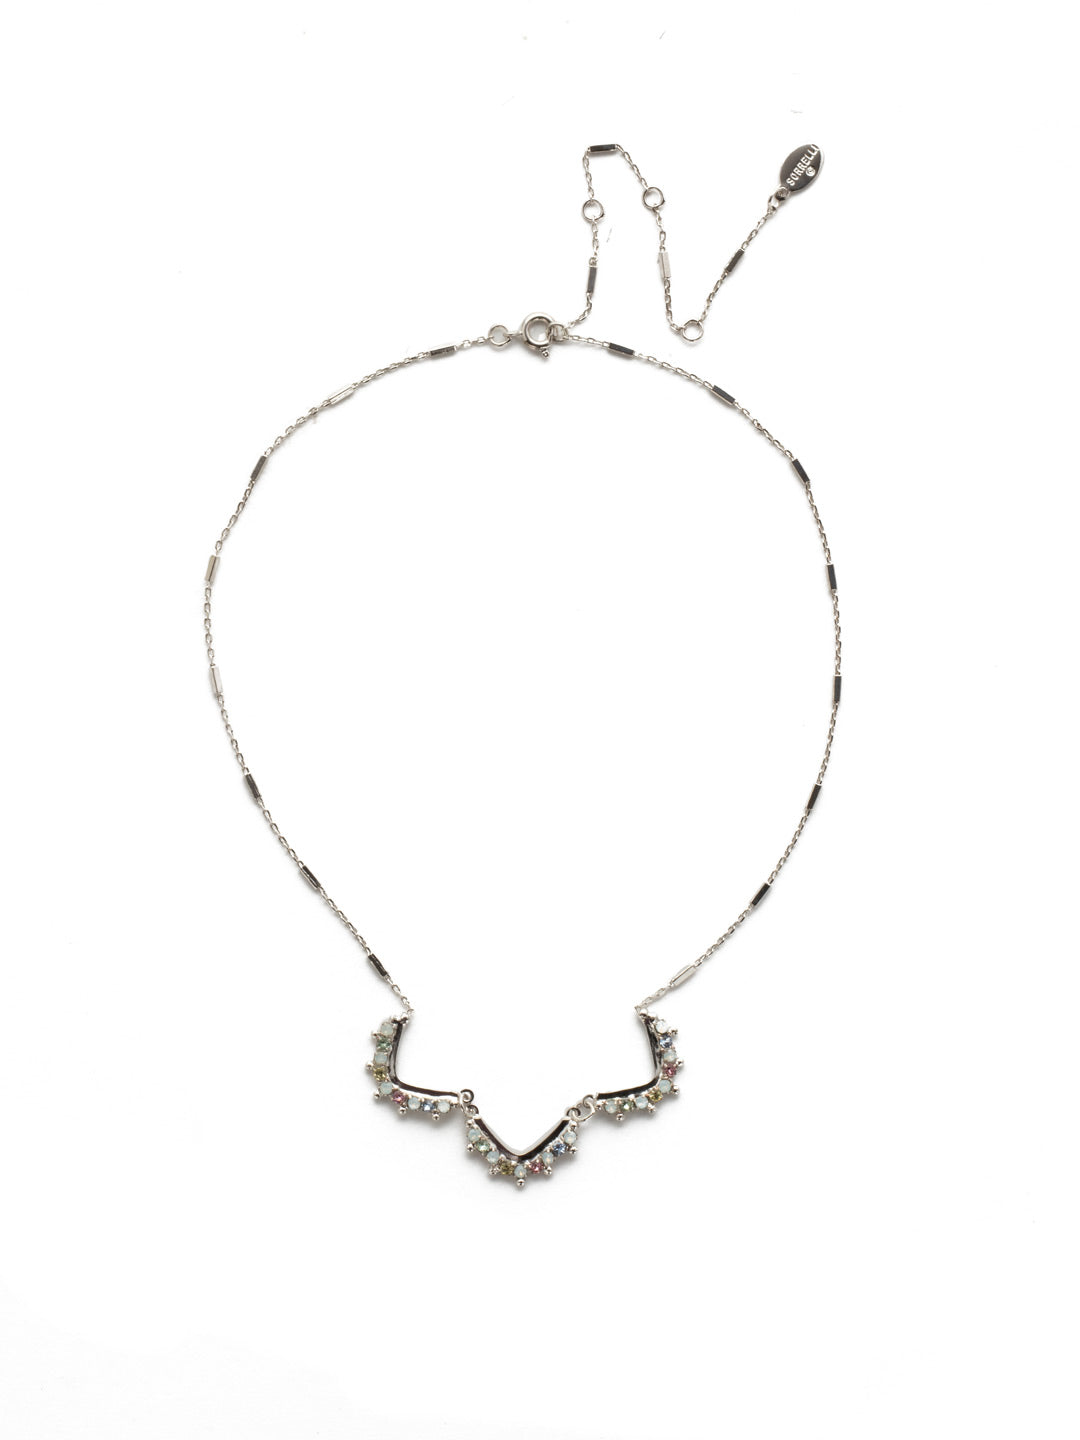 Antoinette Pendant Necklace - NEK12RHSSU - <p>Fasten on this delicate filigree strand with a unique pendant necklace layered in sparkling crystals when you're looking to make a statement. From Sorrelli's Seersucker collection in our Palladium Silver-tone finish.</p>